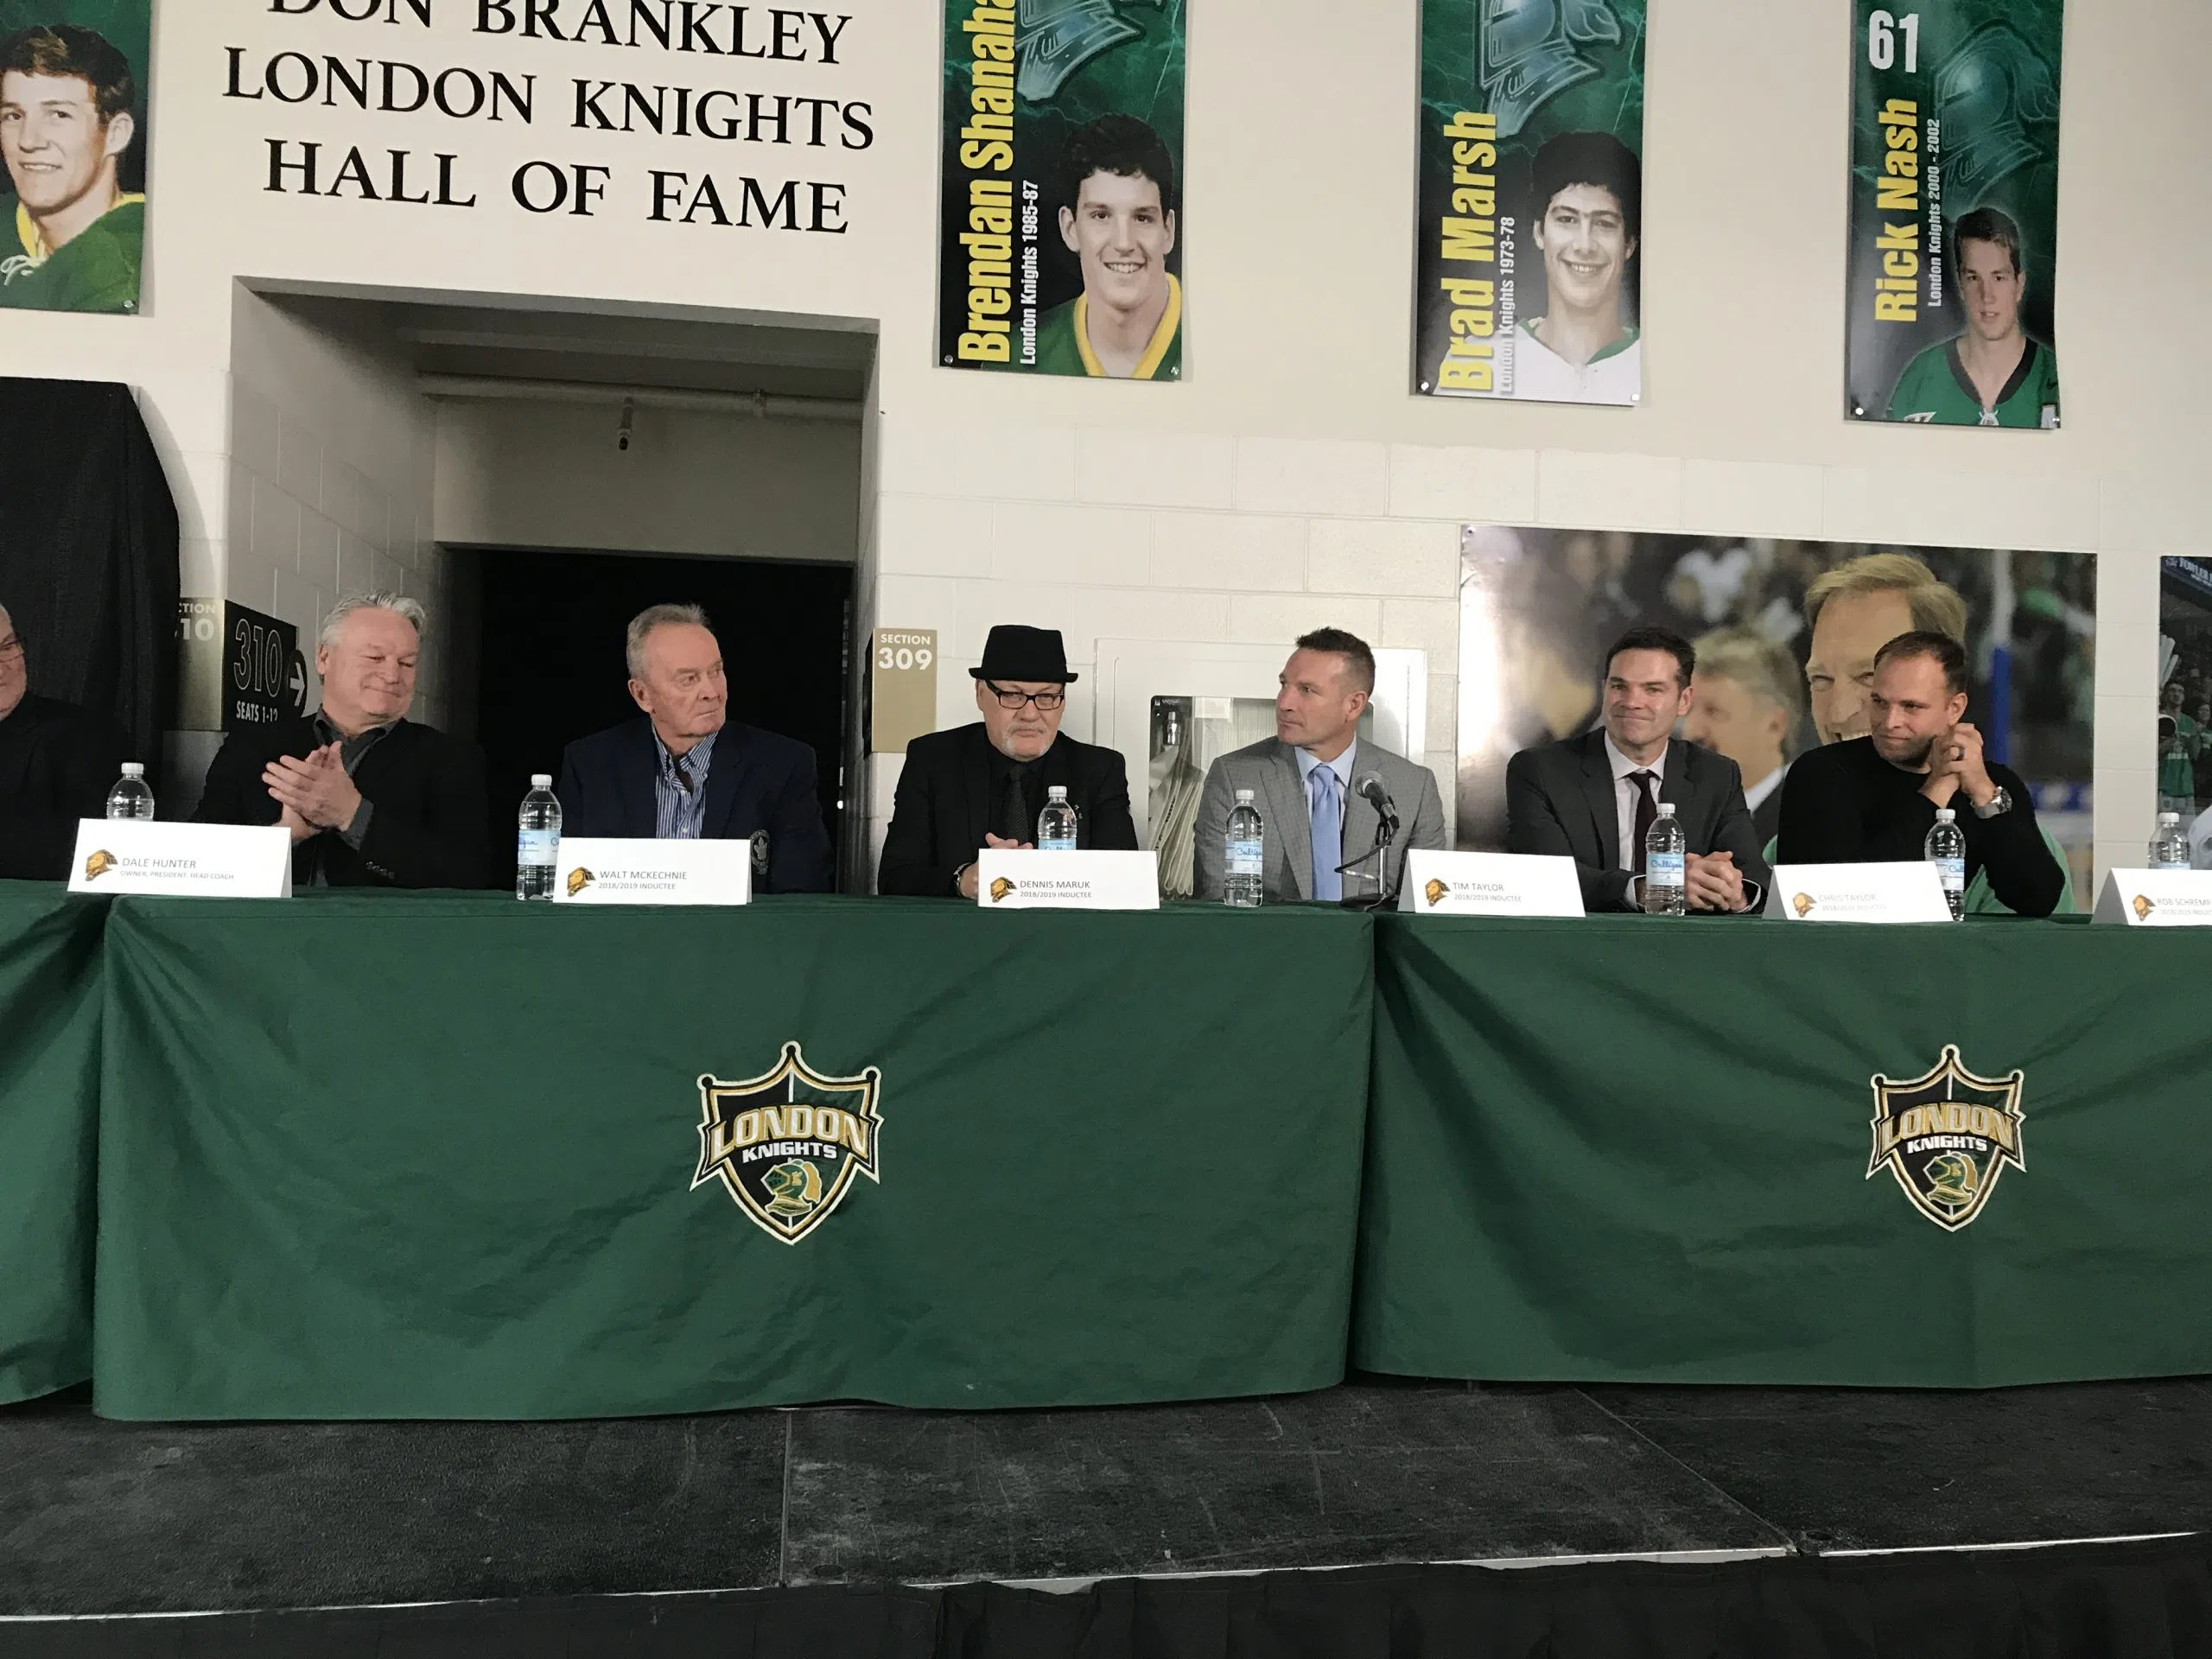 KNIGHTS IN THE CLASSROOM - London Knights